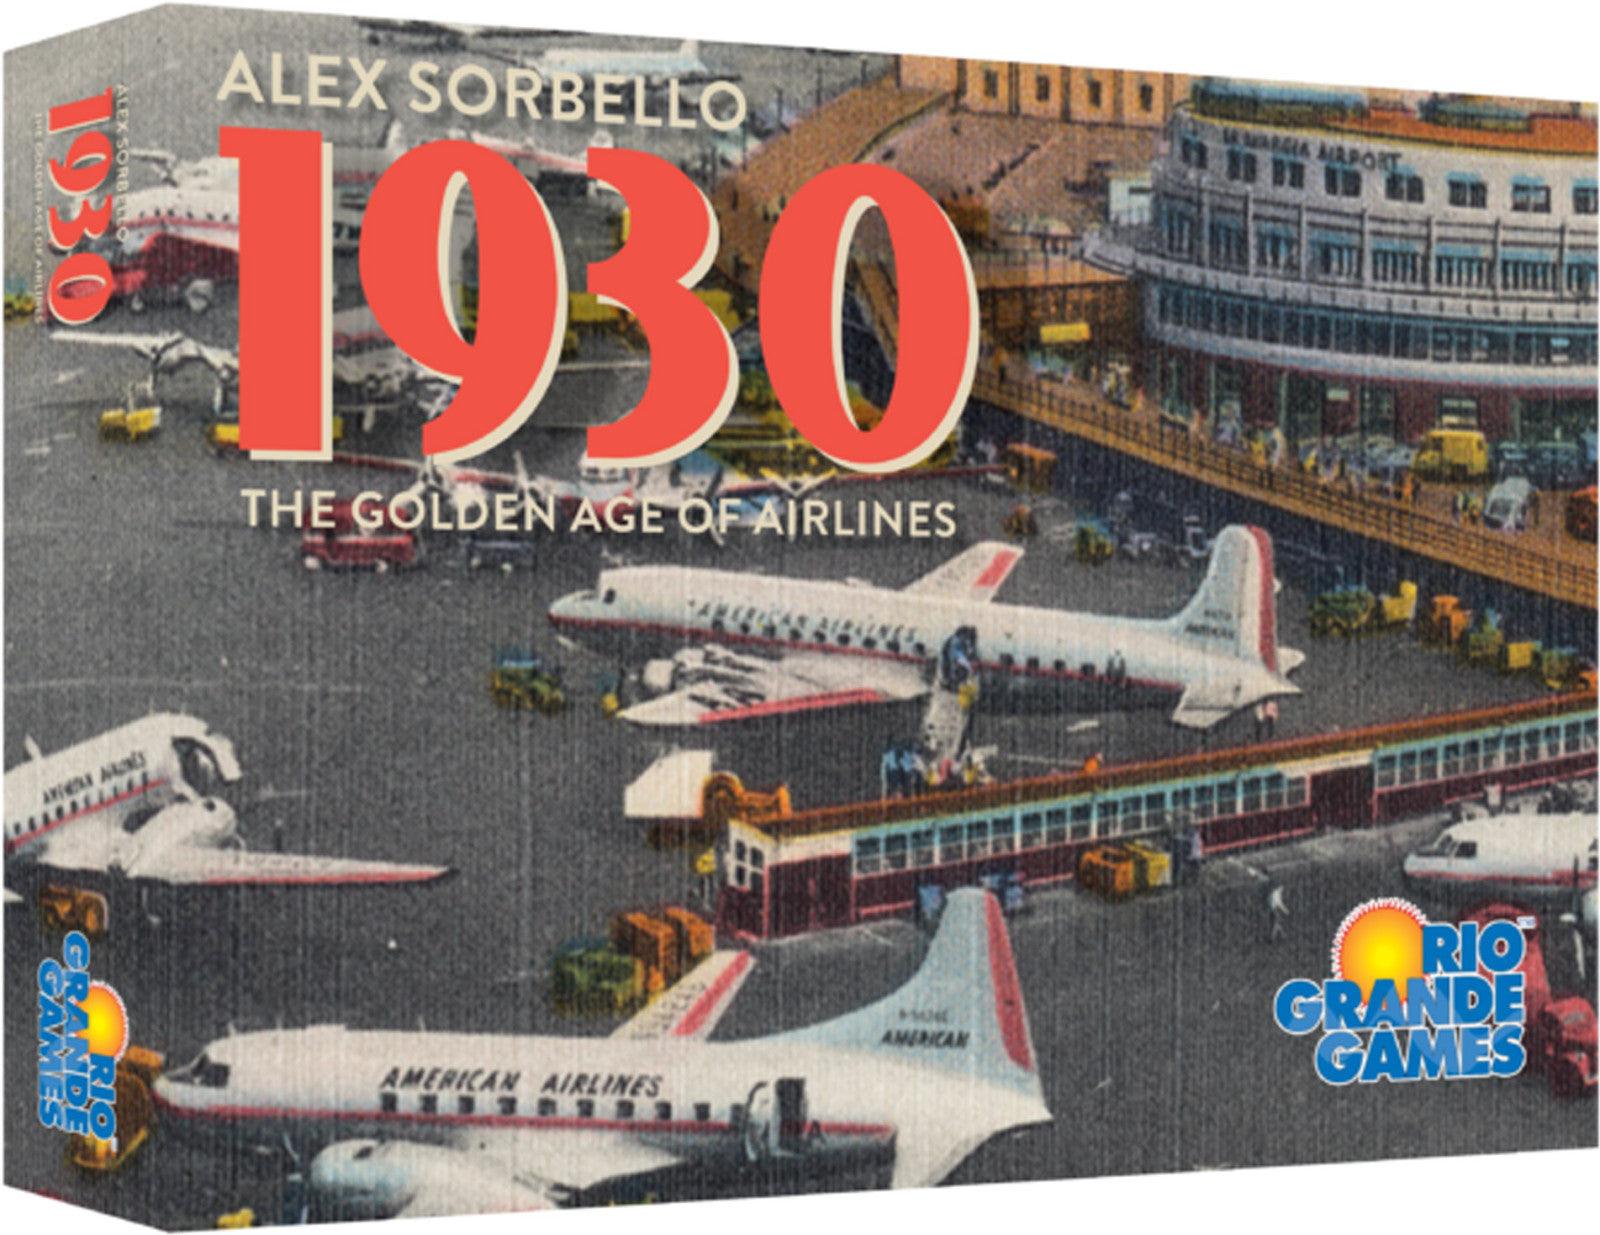 Golden Age of Airlines 1930